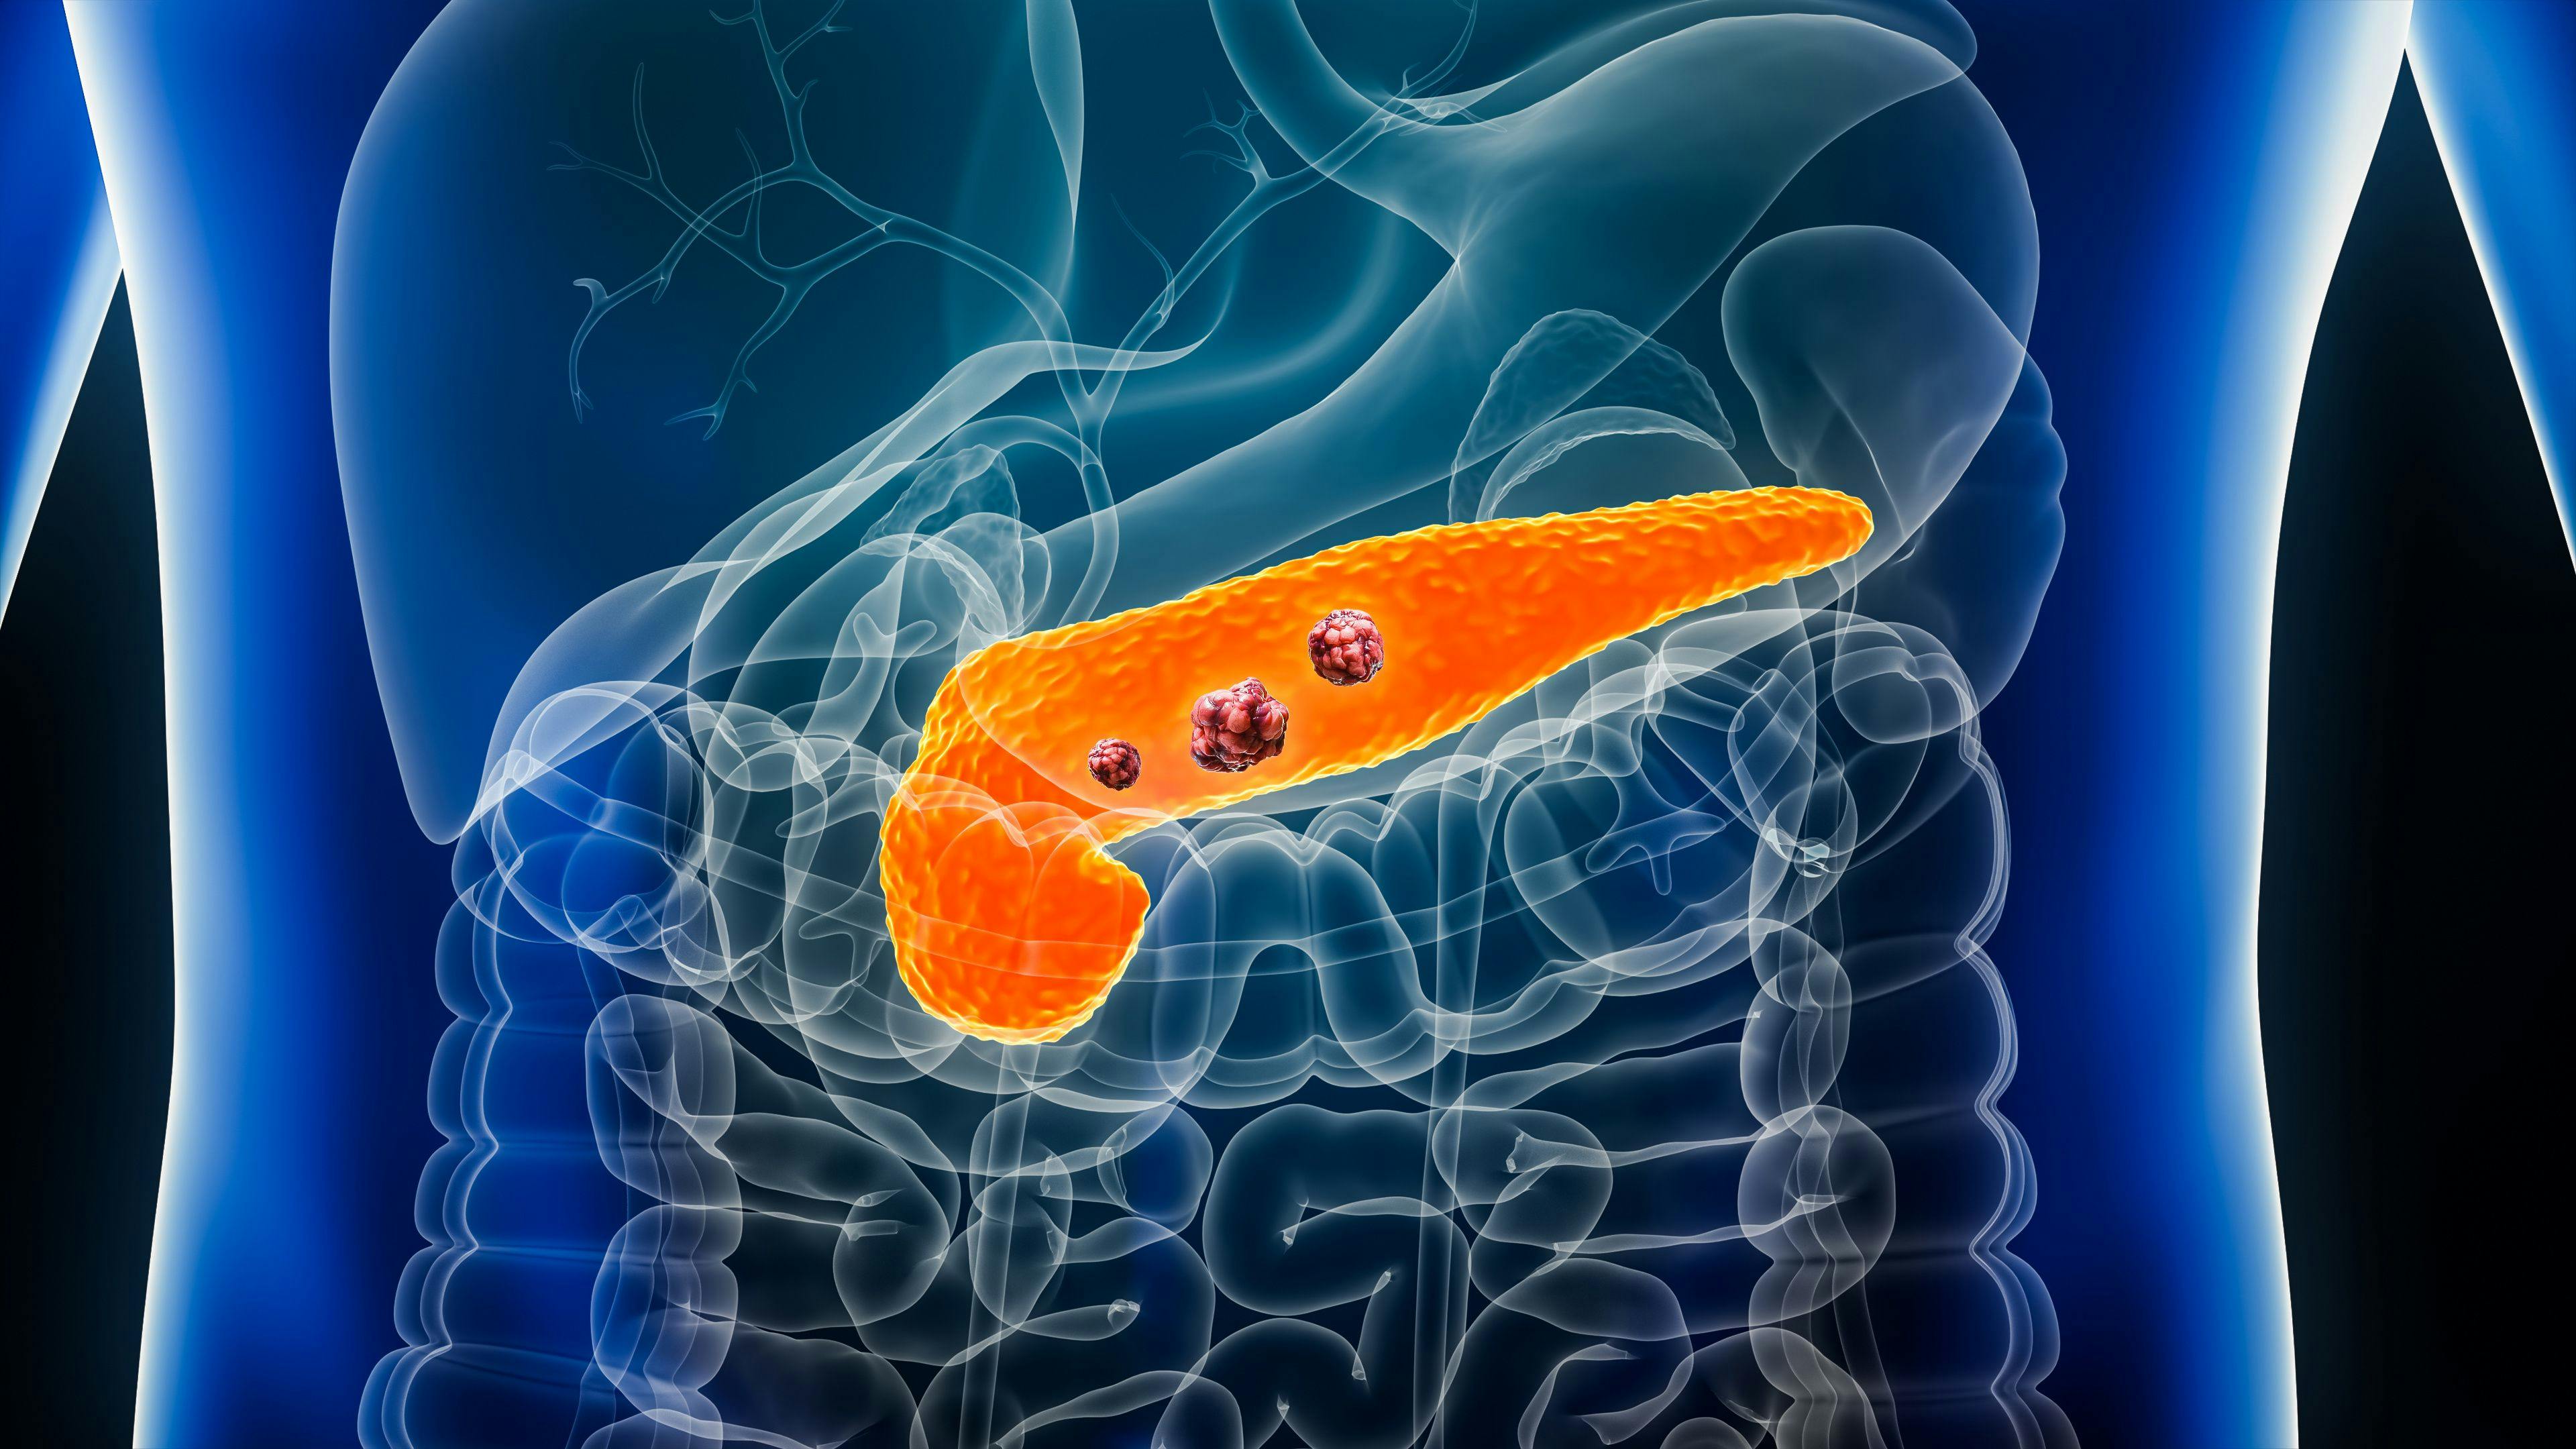 Pancreas or pancreatic cancer with organs and tumors or cancerous cells 3D rendering illustration with male body. Anatomy, oncology, disease, medical, biology, science, healthcare concepts. | Image Credit: © Matthieu - stock.adobe.com